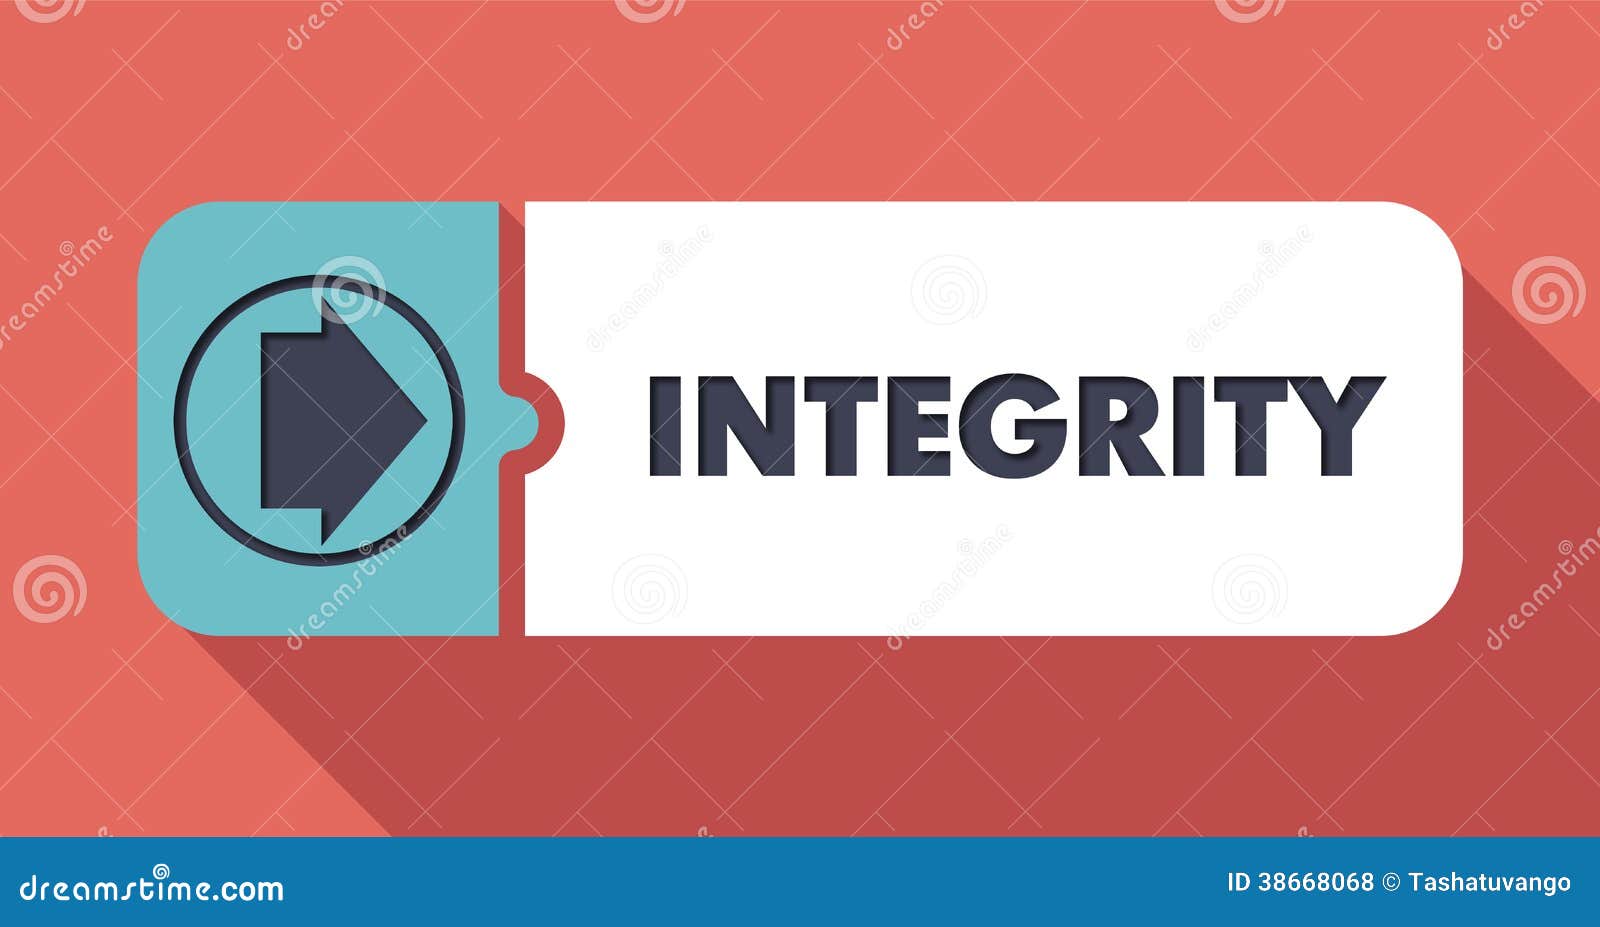 integrity clipart - photo #22